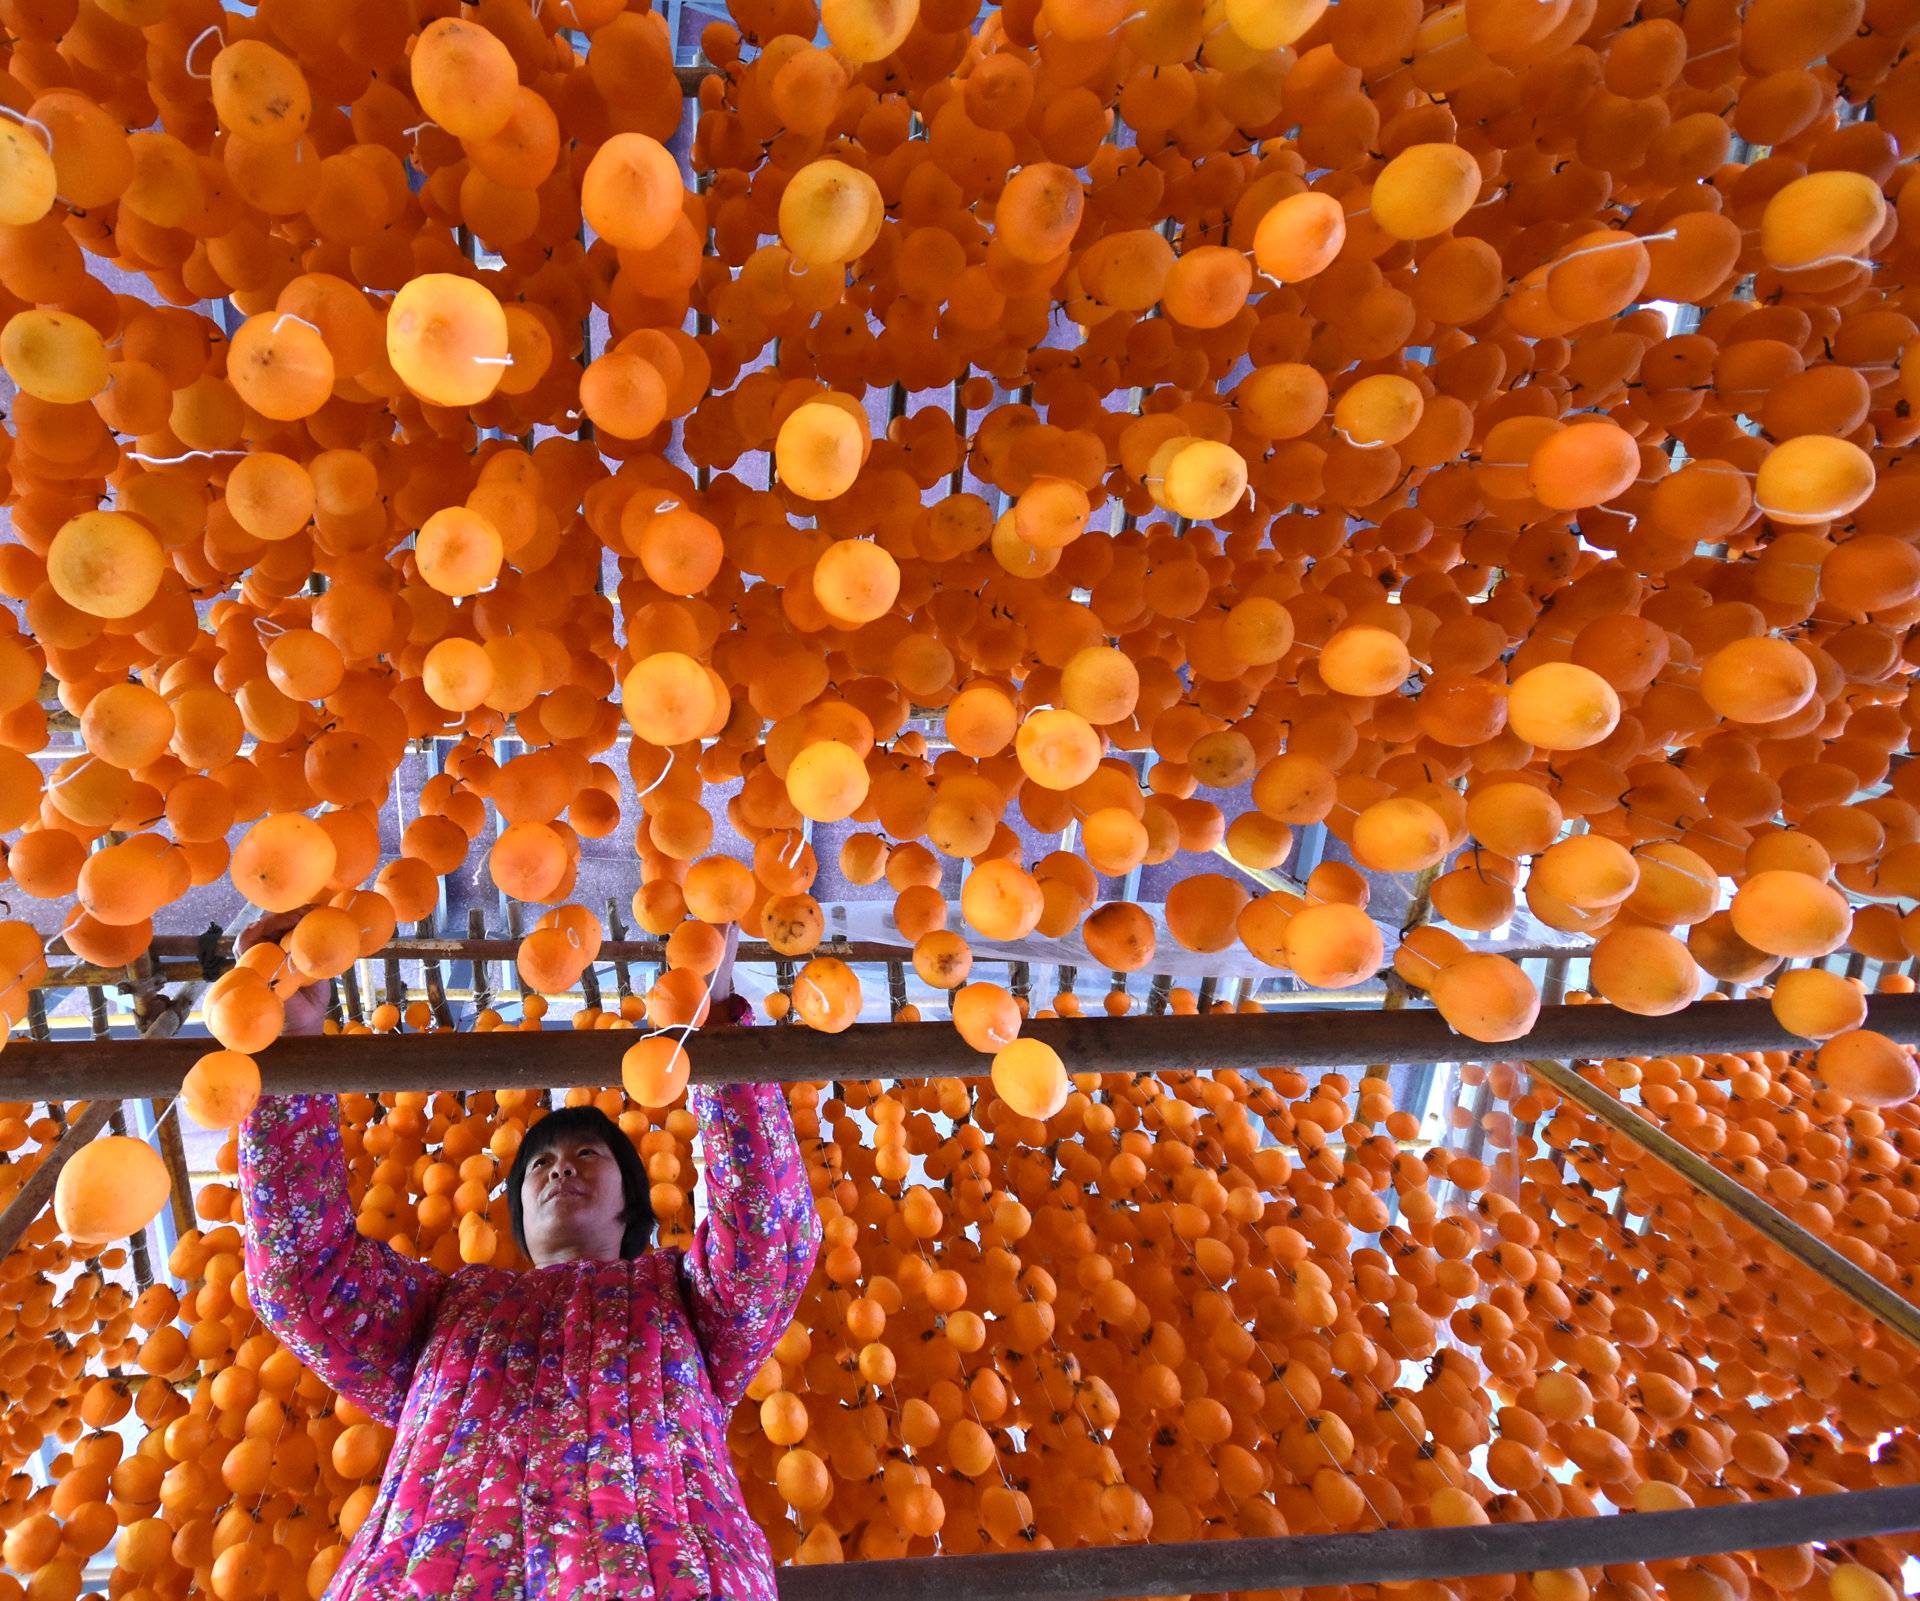 A woman dries persimmons at a workshop in Yiyuan County